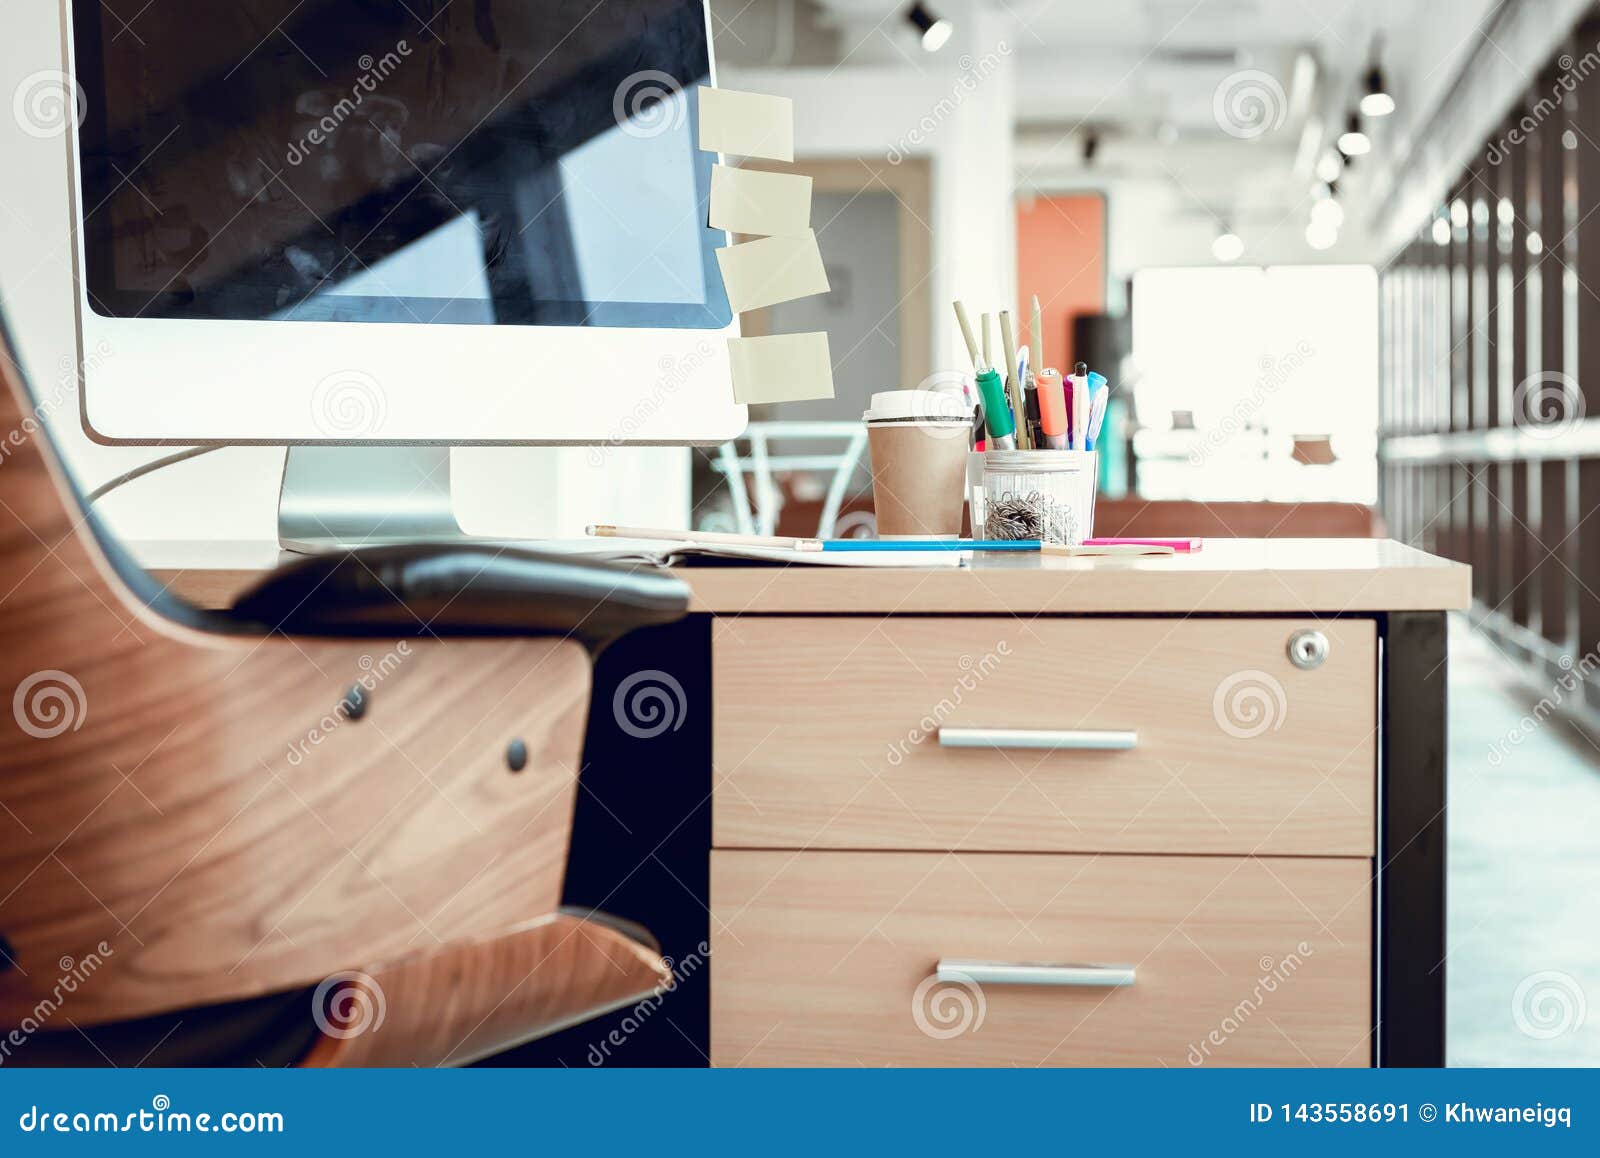 Business Workplace and Table Desktop of Office Room, Interior Workspace ...